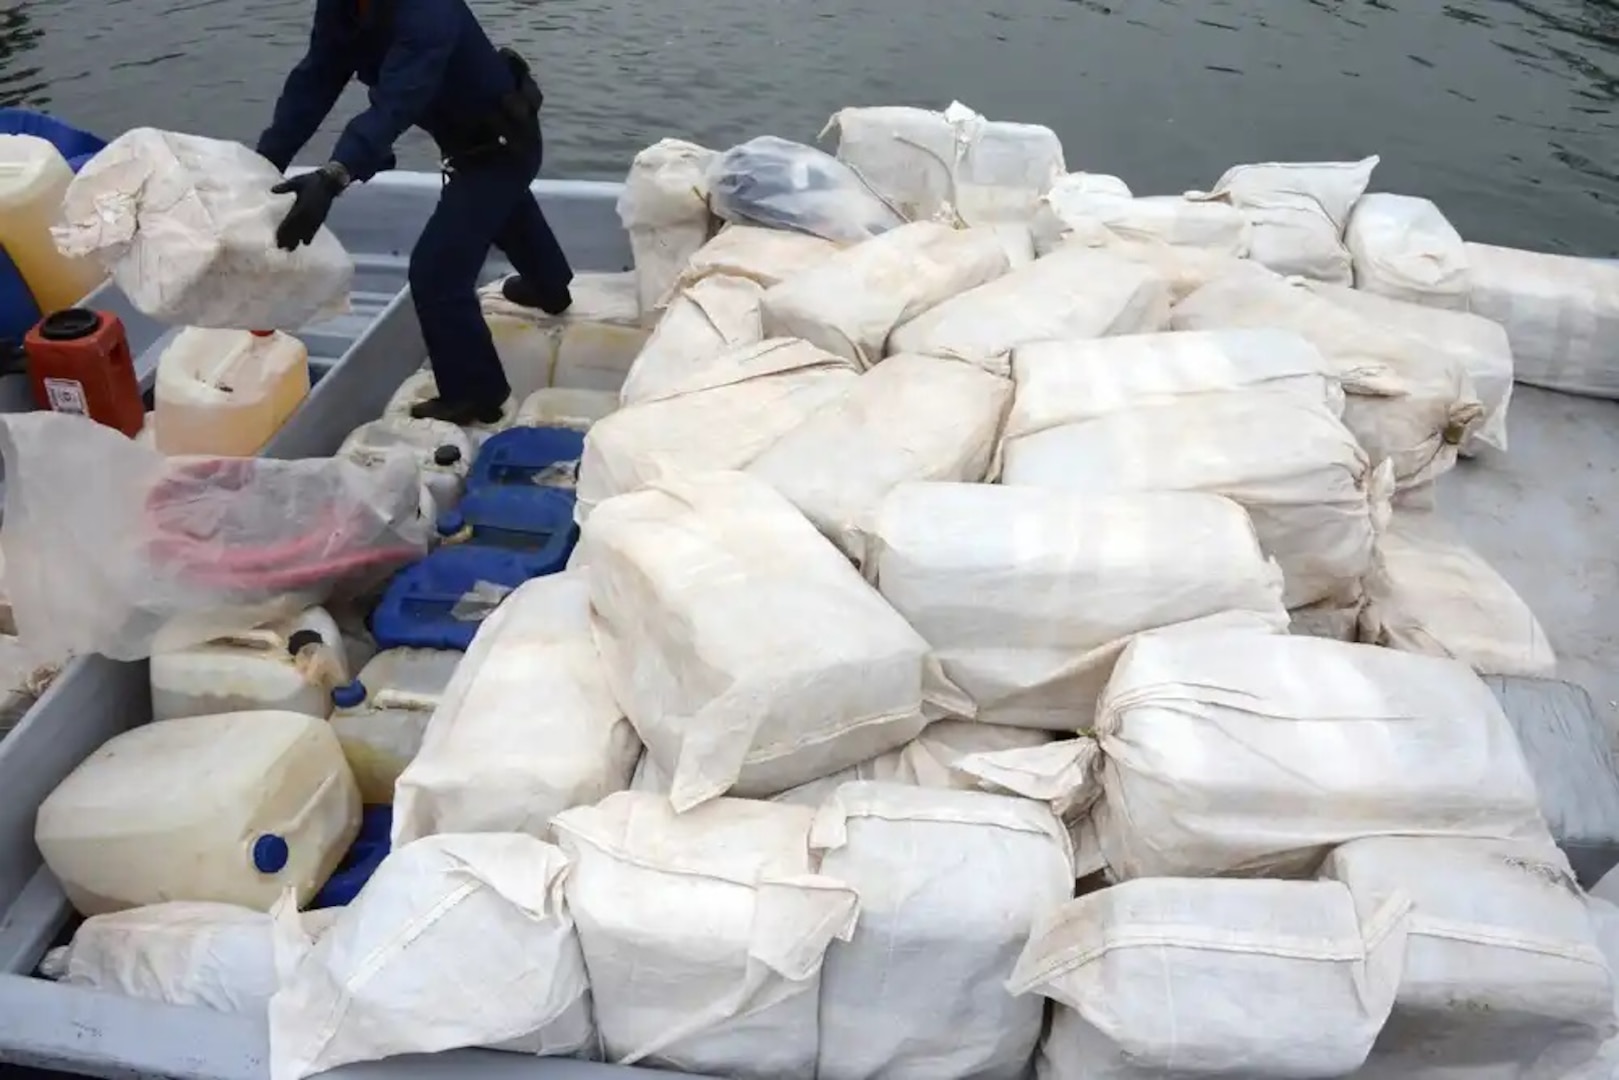 A U.S. Coast Guard crew member unloads a bale of marijuana from a panga boat that was seized 160 miles southwest of San Diego June 28, 2014. The Coast Guard detained three suspects and seized approximately 7,600 pounds of marijuana. (U.S. Coast Guard photo by Petty Officer 1st Class Henry G. Dunphy)